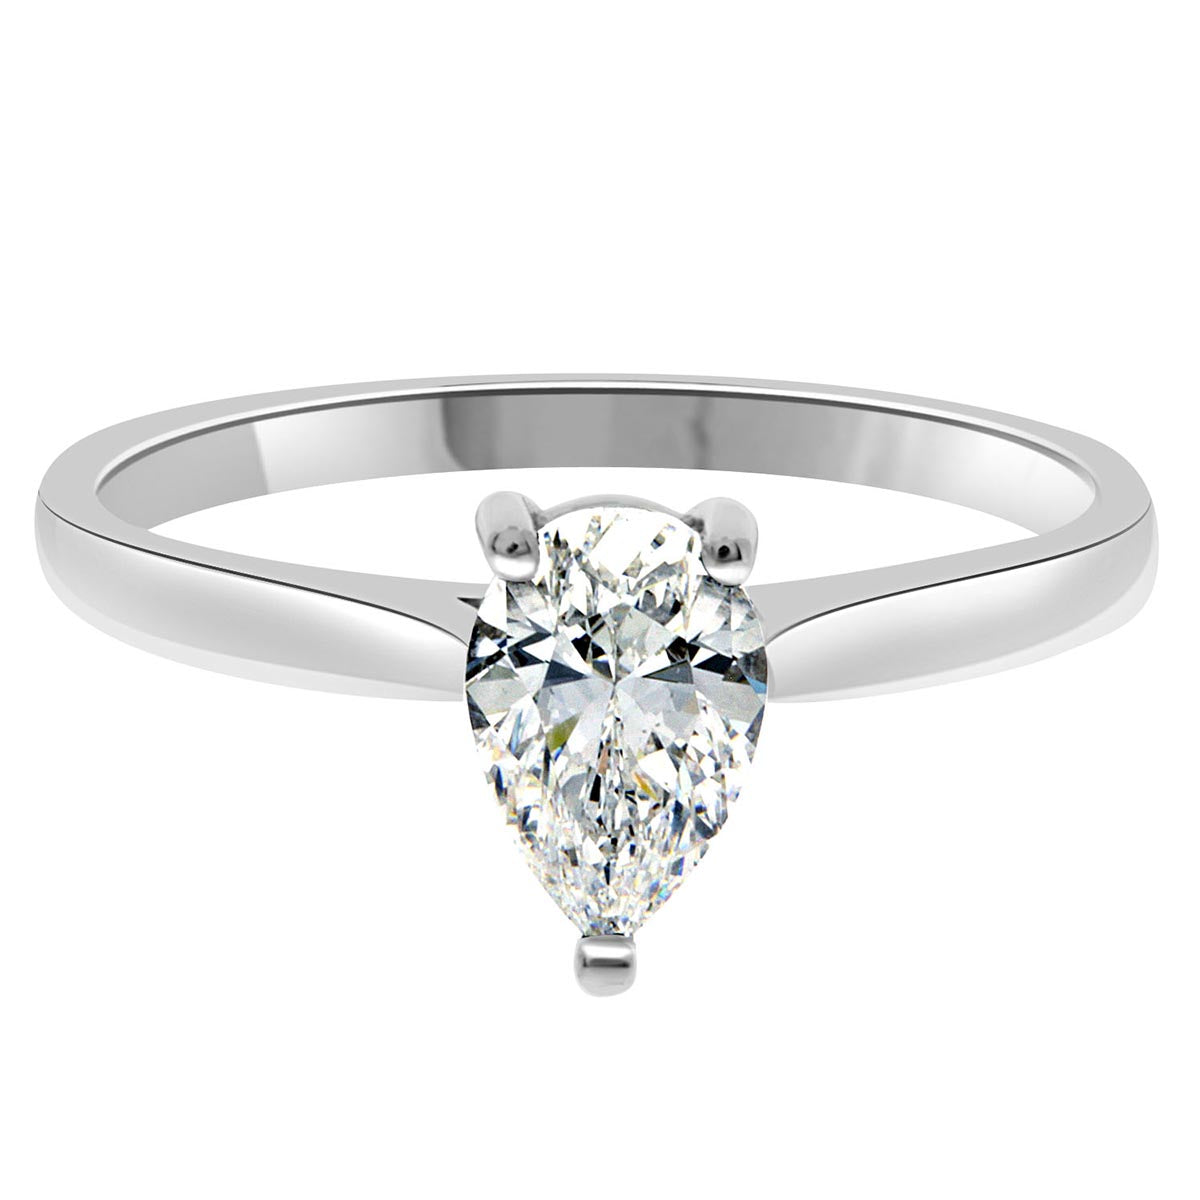 Pear Cut Solitaire Engagement Ring made from white gold